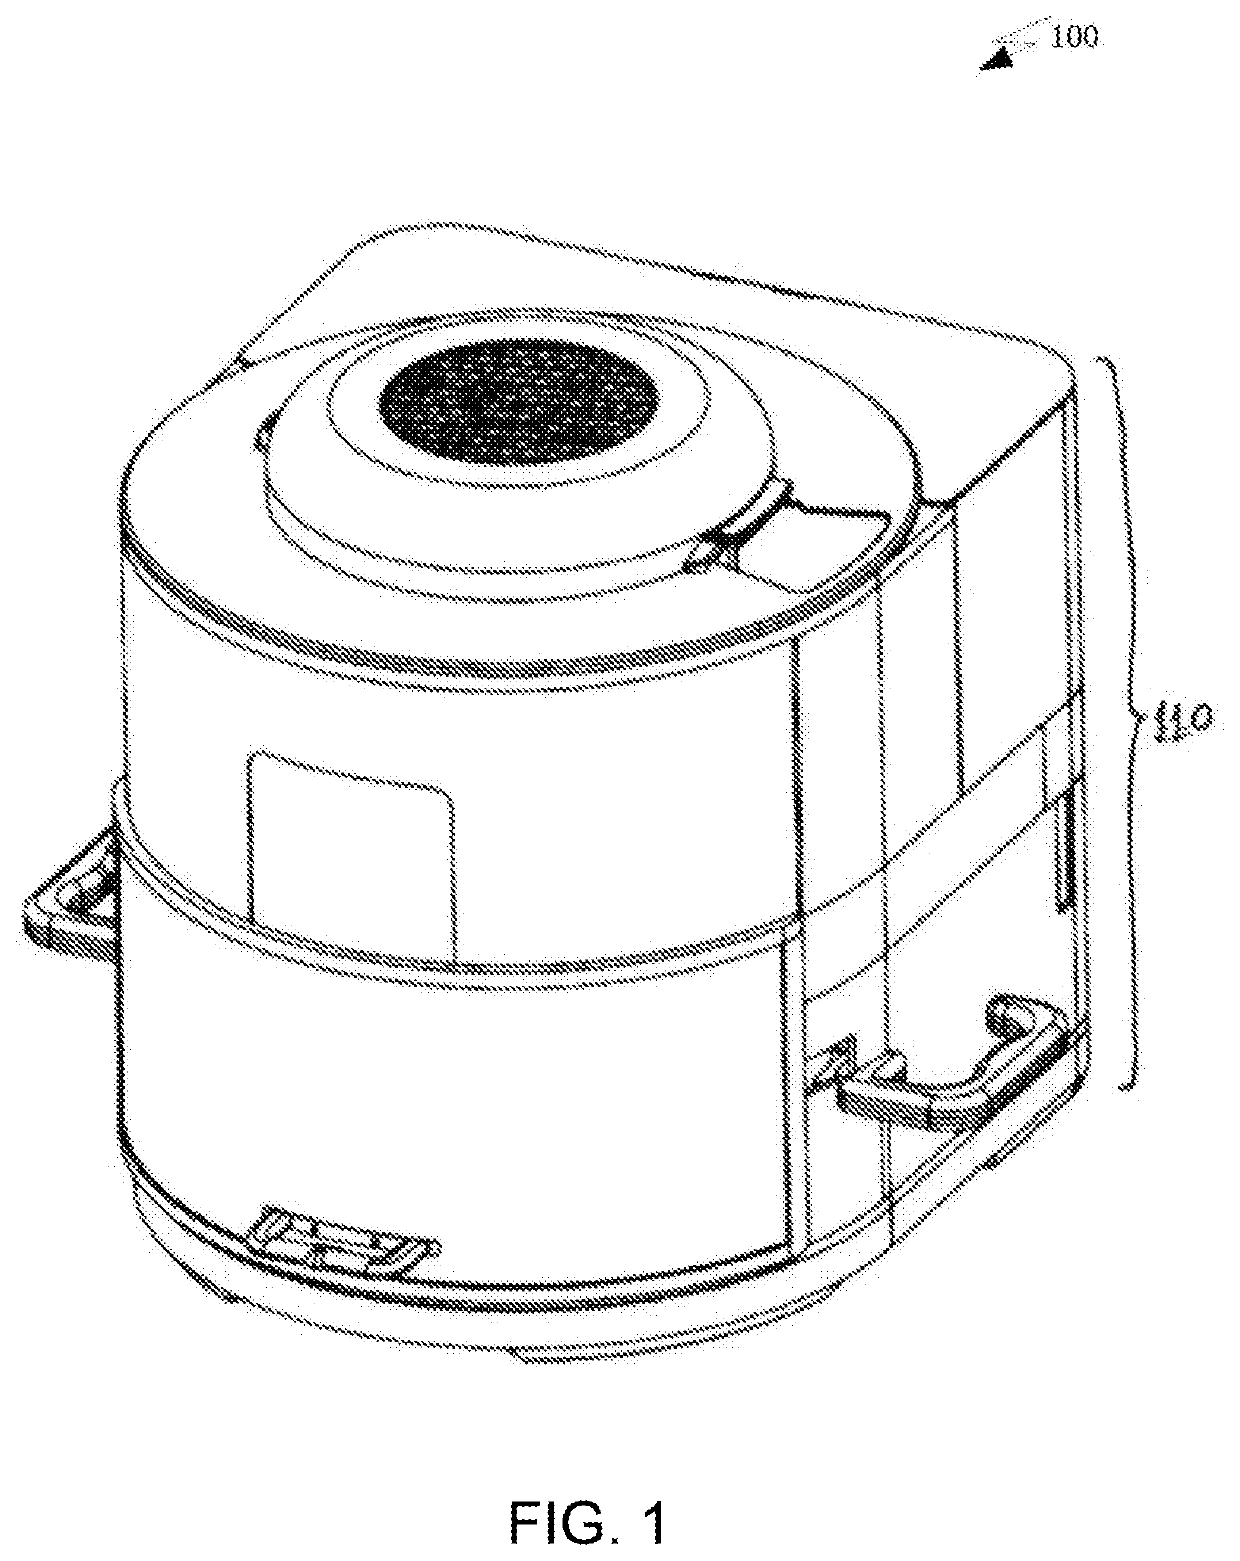 Apparatus for automatic meal preparation